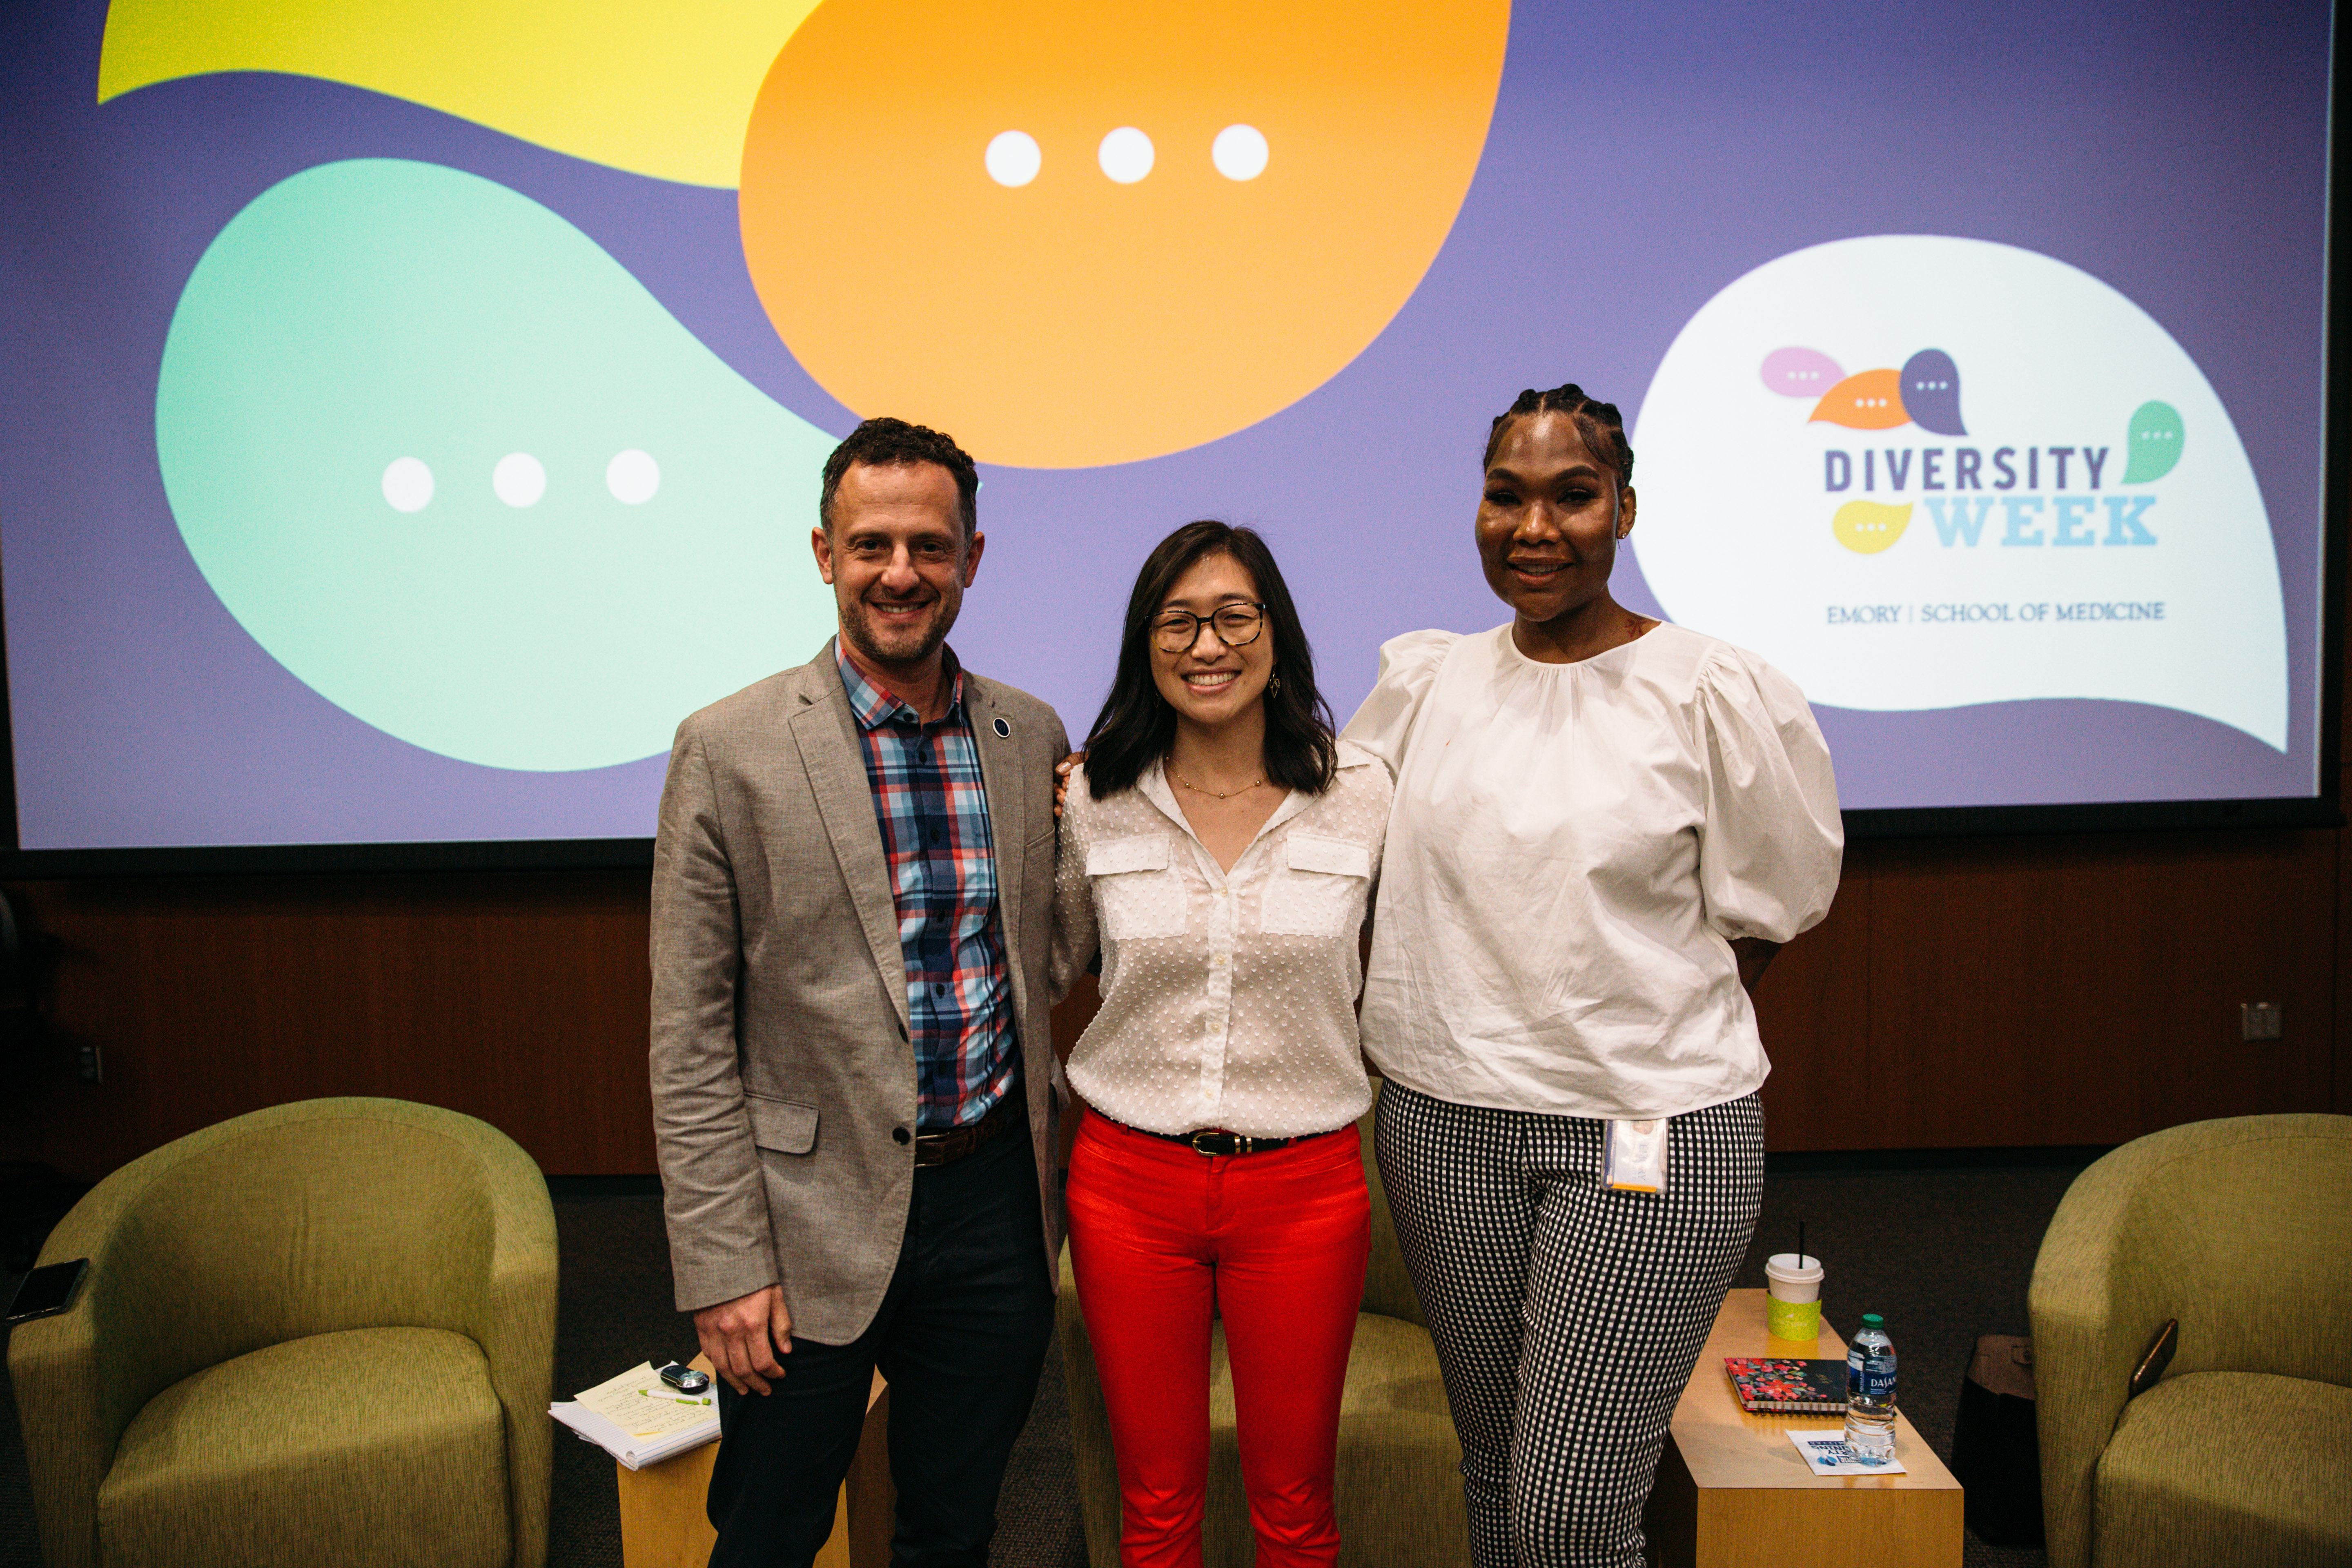 Three people stand in front of a screen with the Diversity and Inclusion Week logo